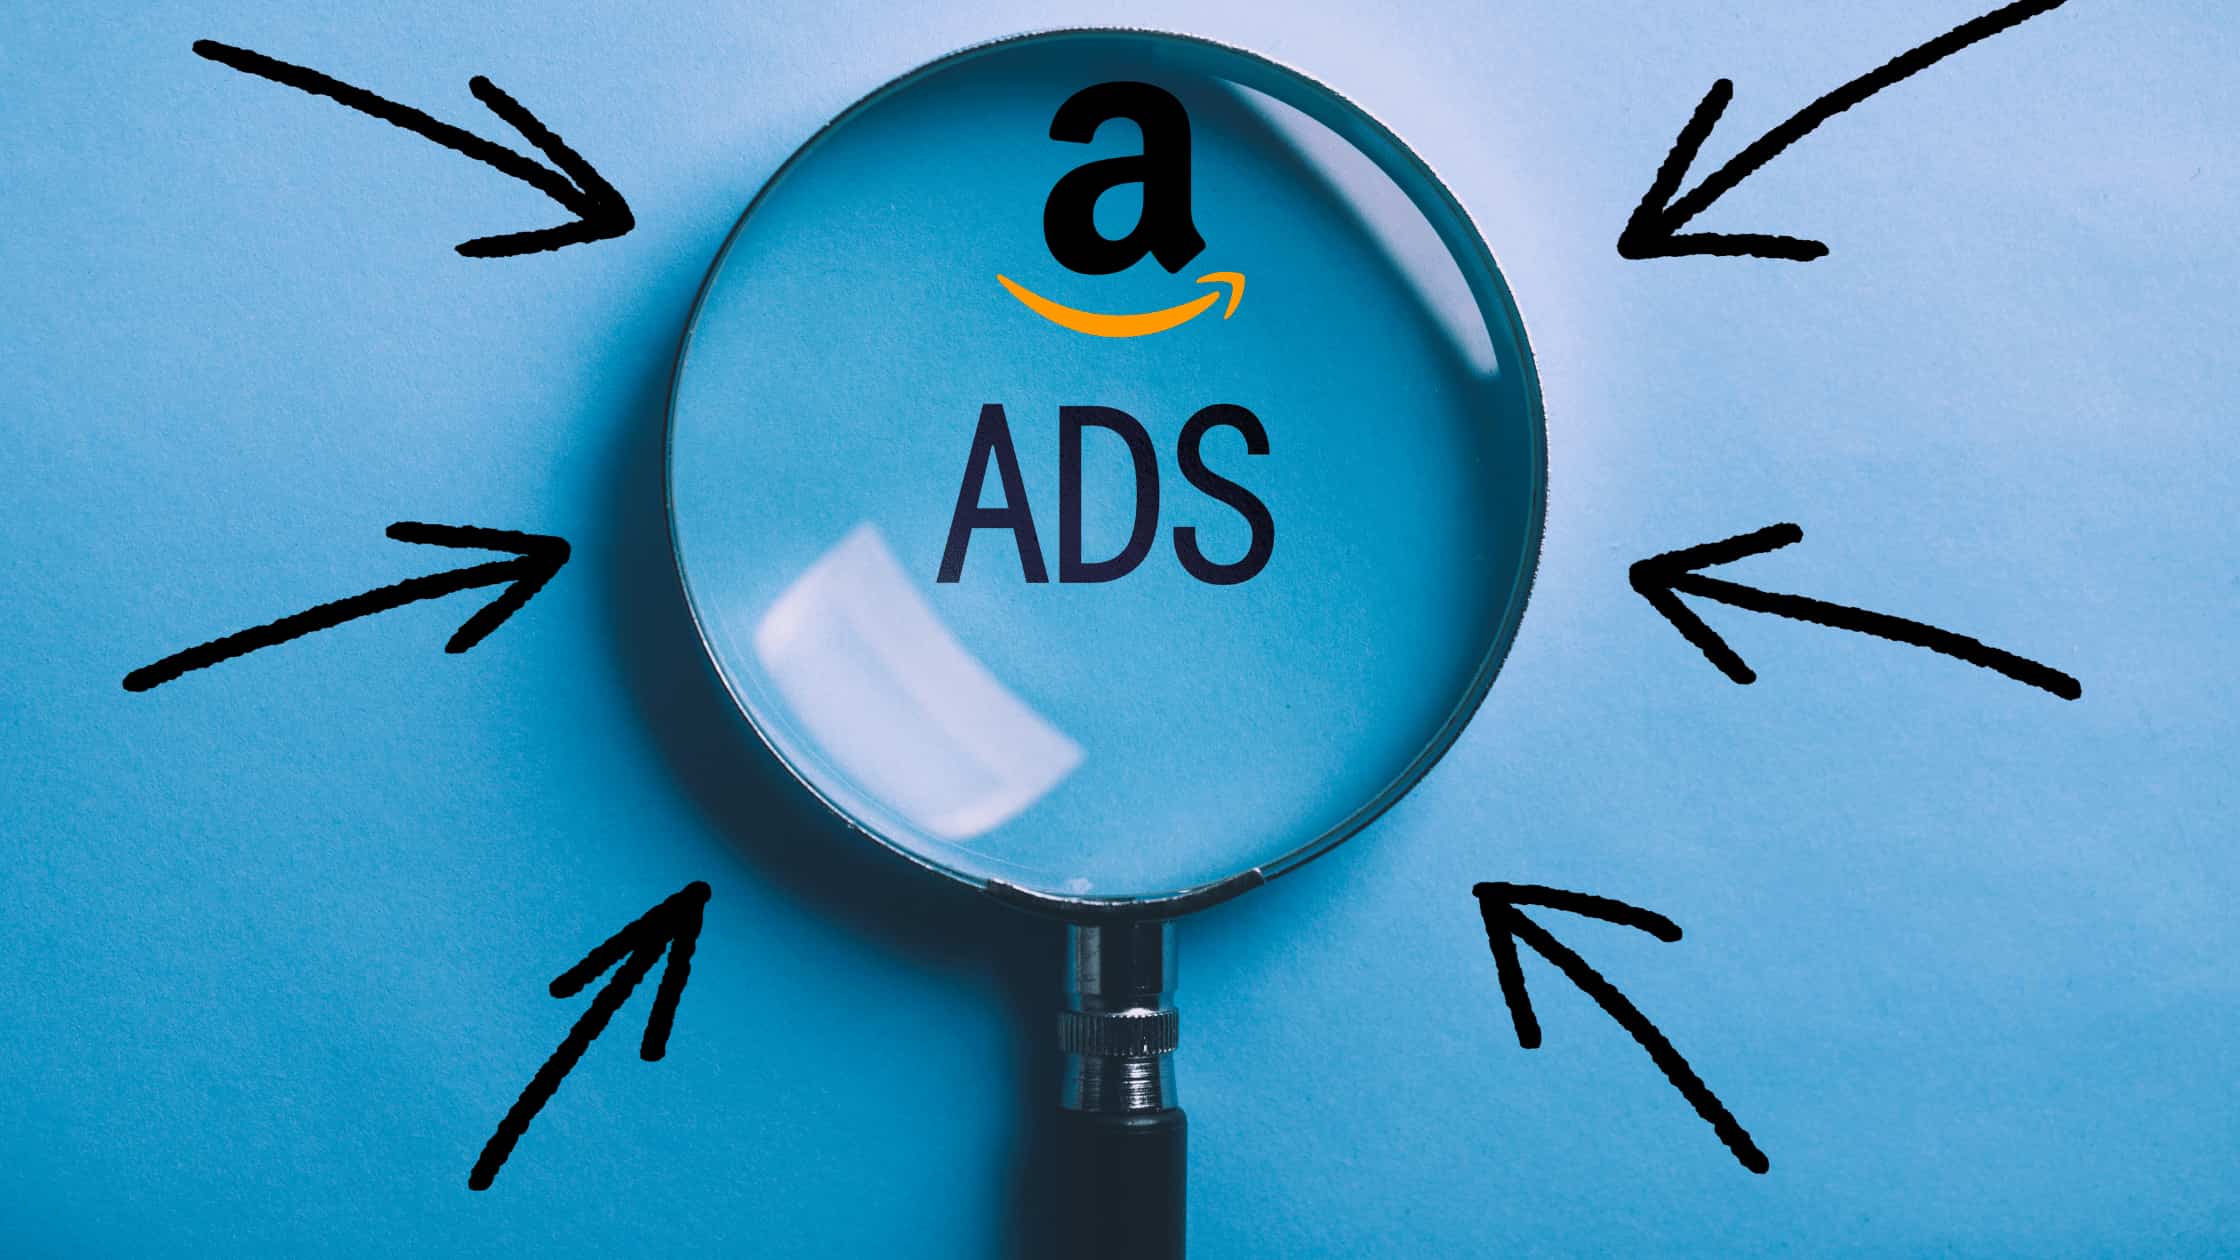 Looking Strategies to Maximize ROI for Amazon Ads Management